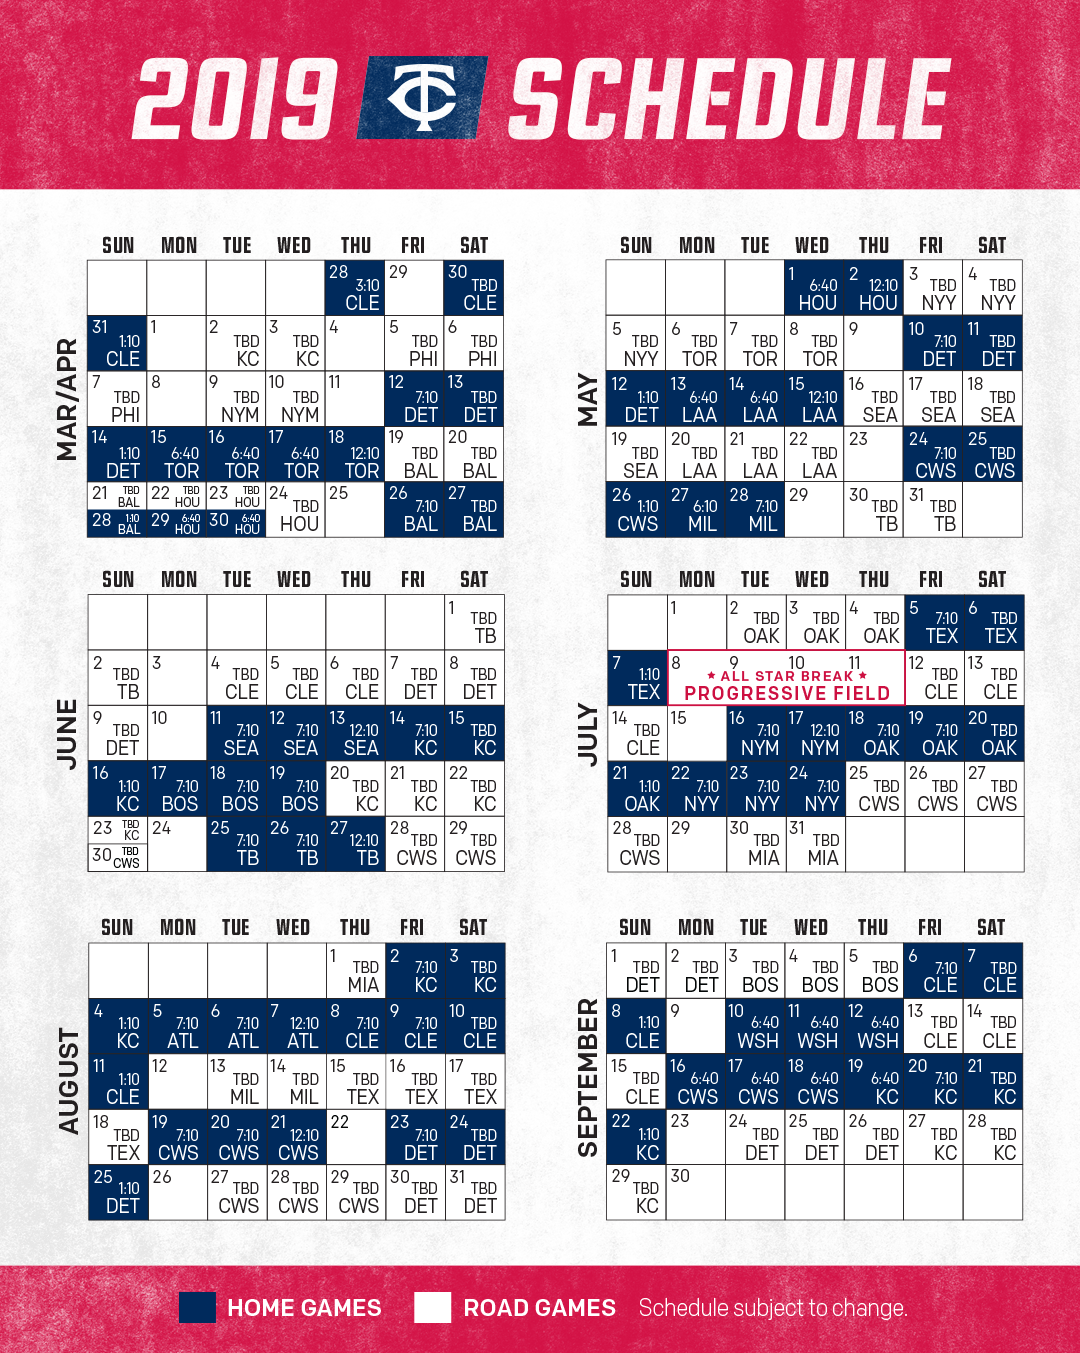 Minnesota Twins Schedule 2022 Printable Minnesota Twins On Twitter: "Here's A Snapshot Of The Full Schedule.  Https://T.co/2Yqbcswvkw" / Twitter